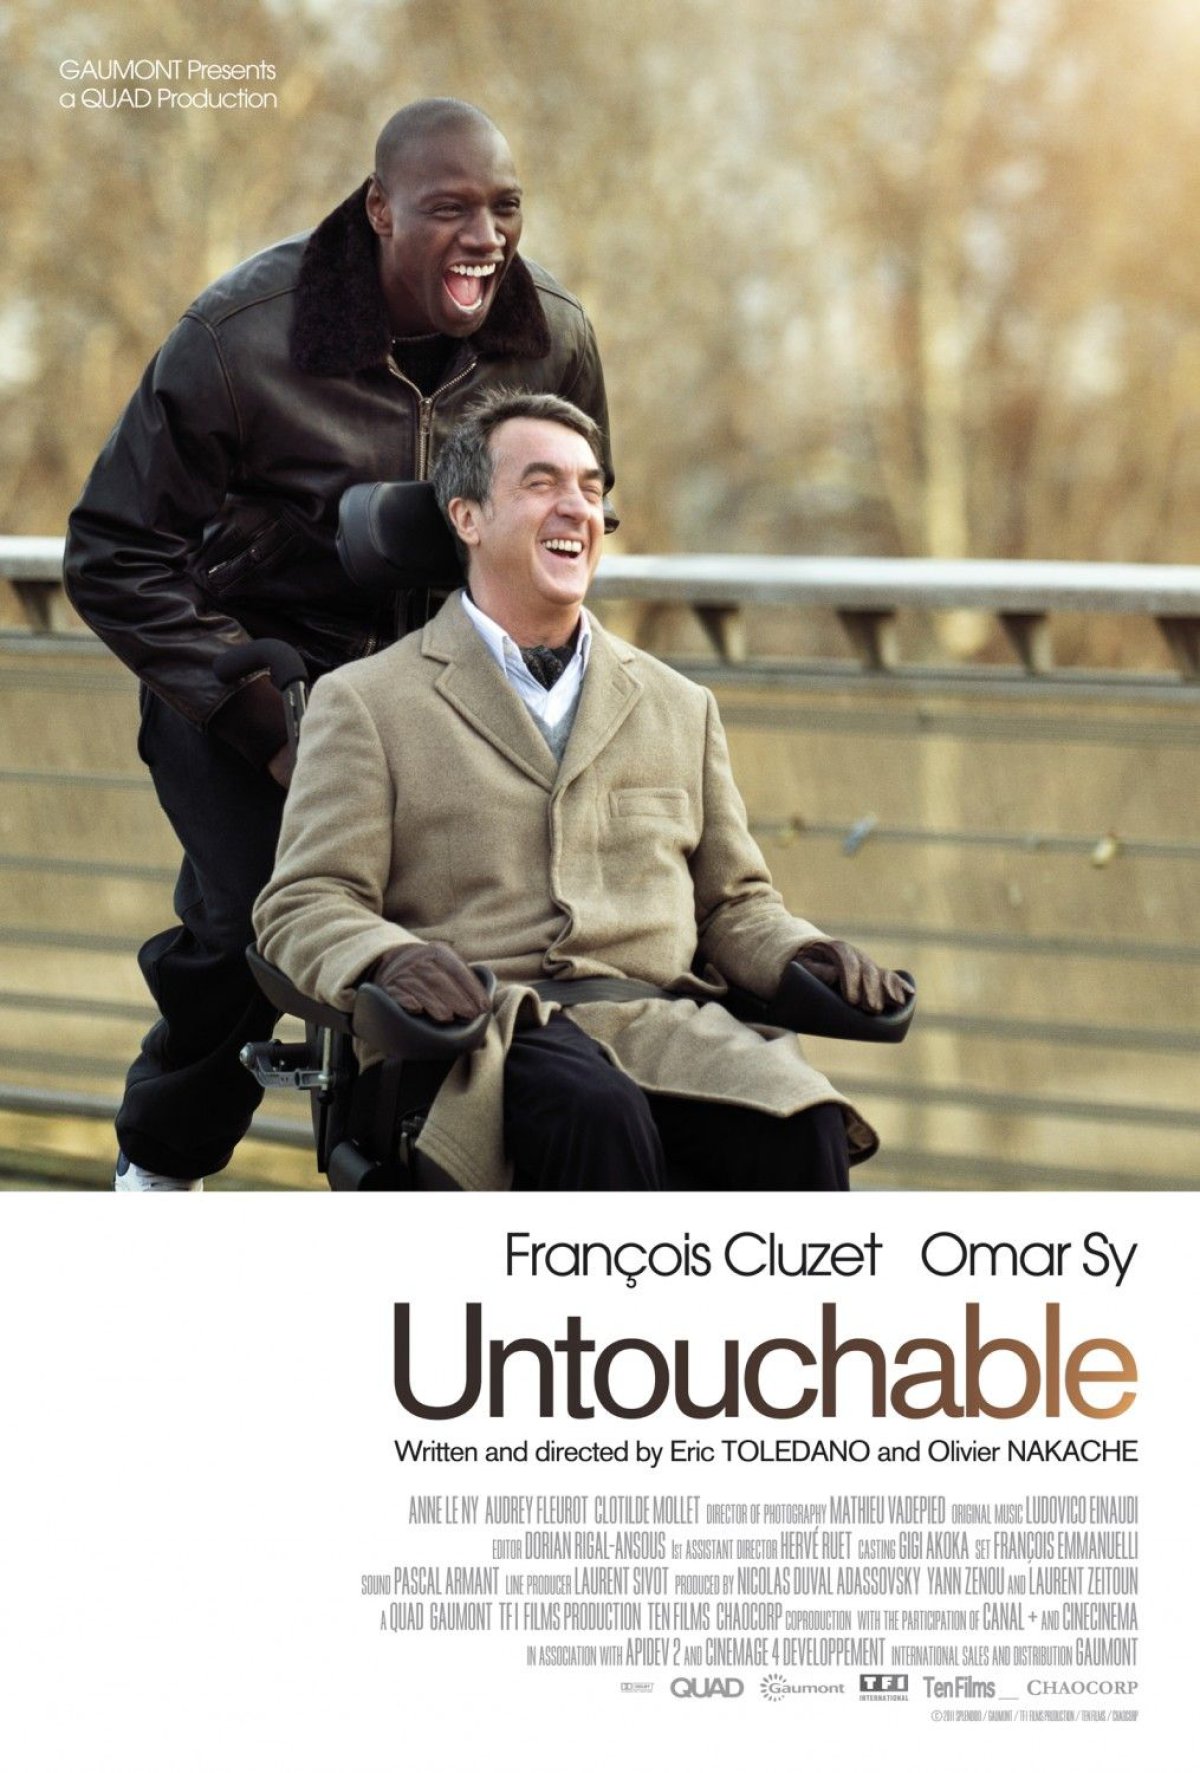 Intocable (2012)